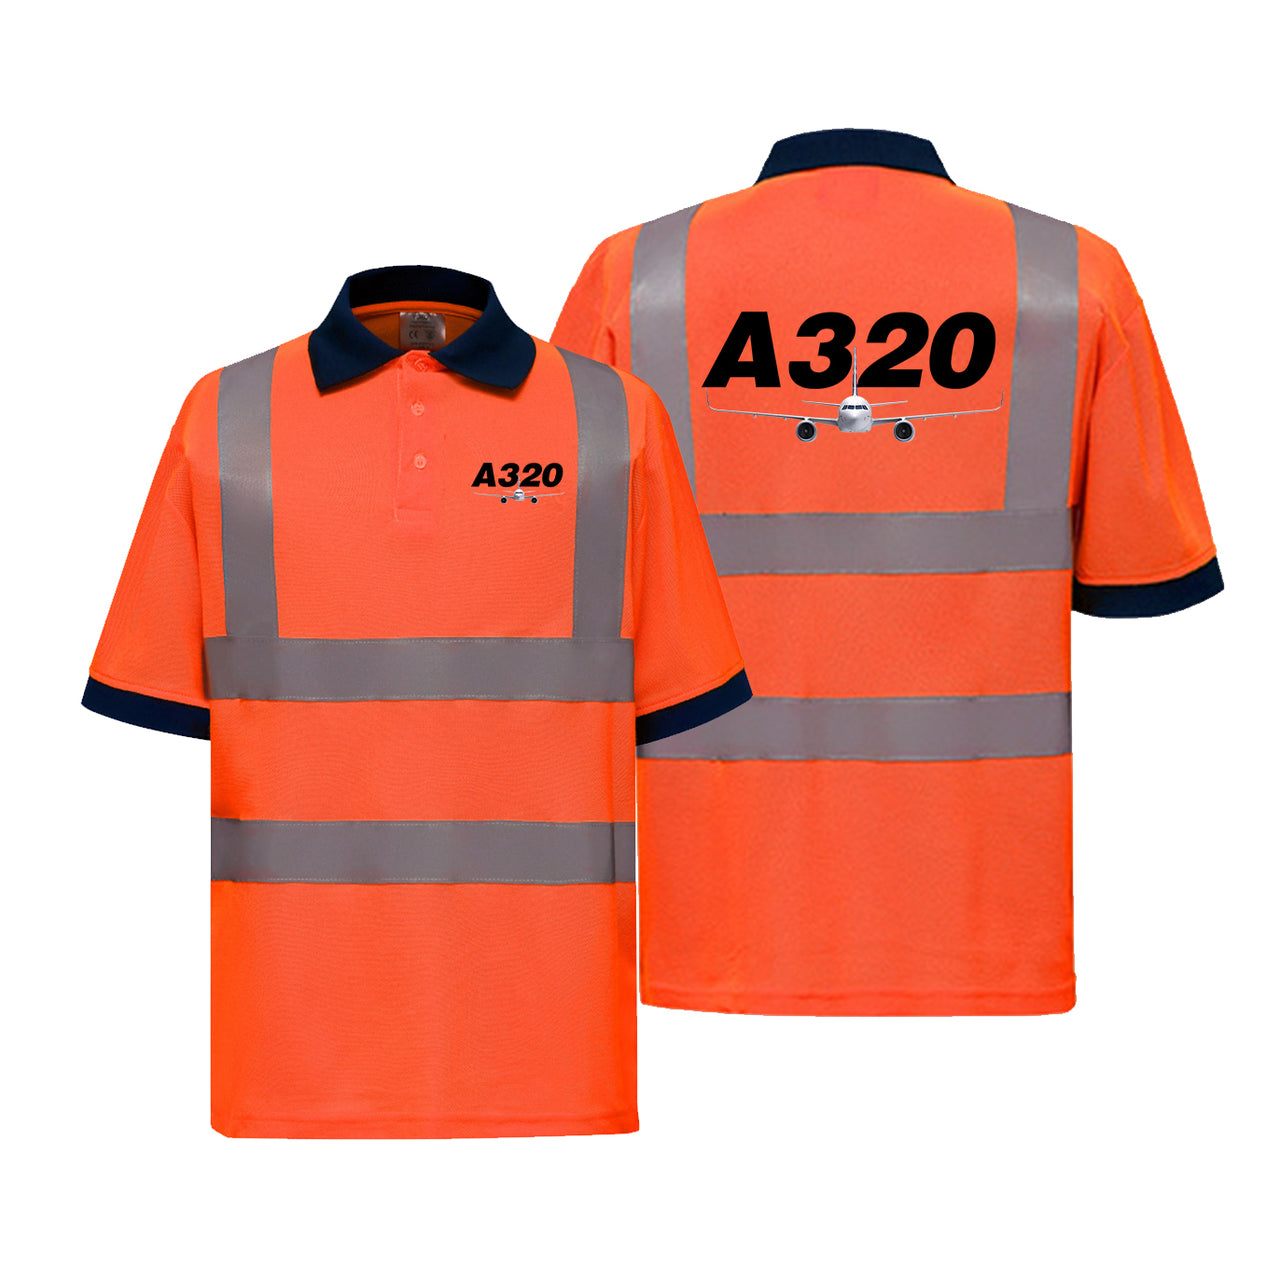 Super Airbus A320 Designed Reflective Polo T-Shirts